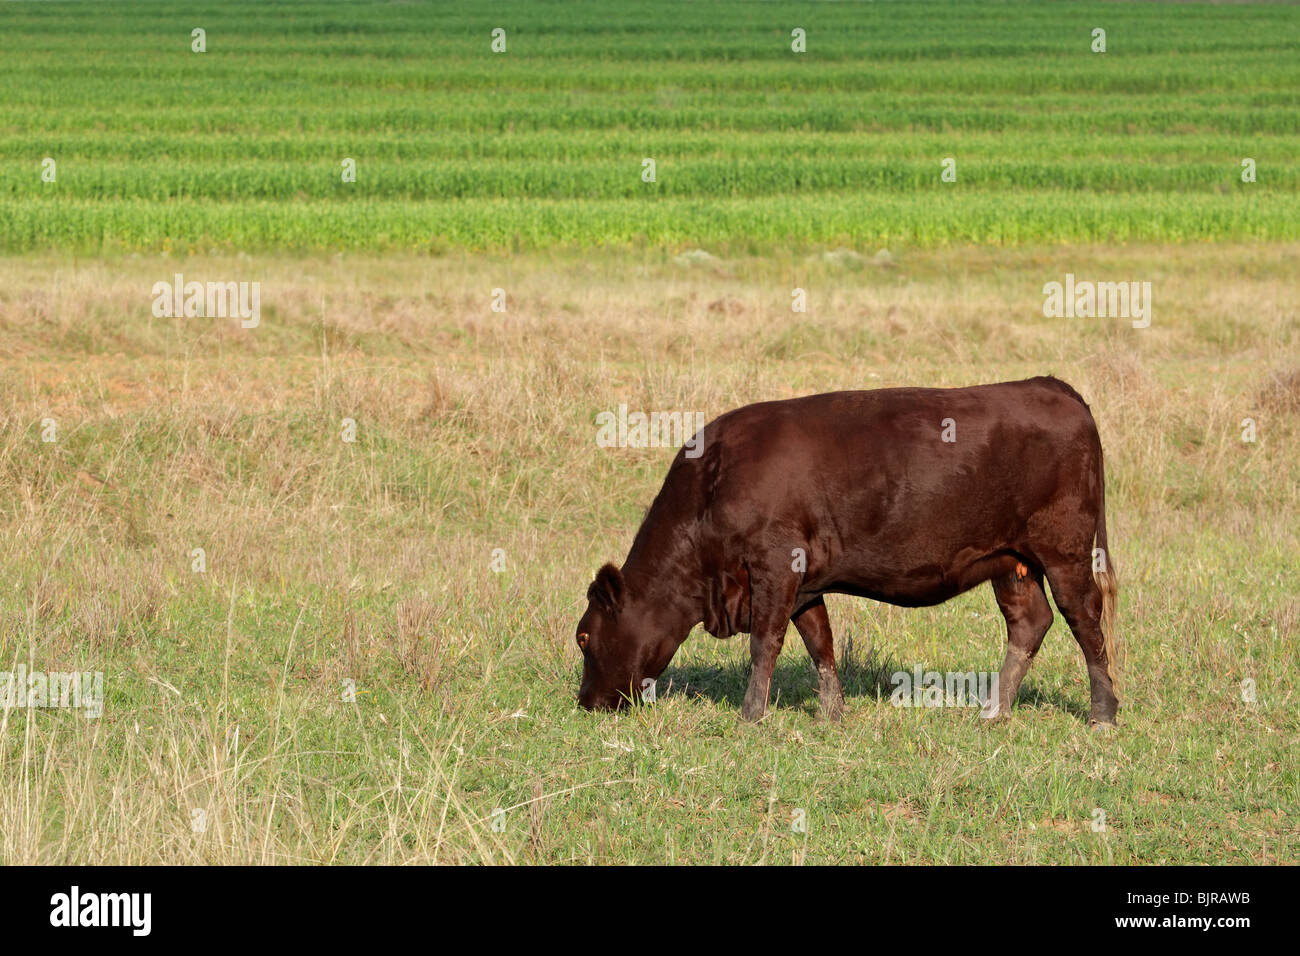 A cow grazing on lush green pasture Stock Photo